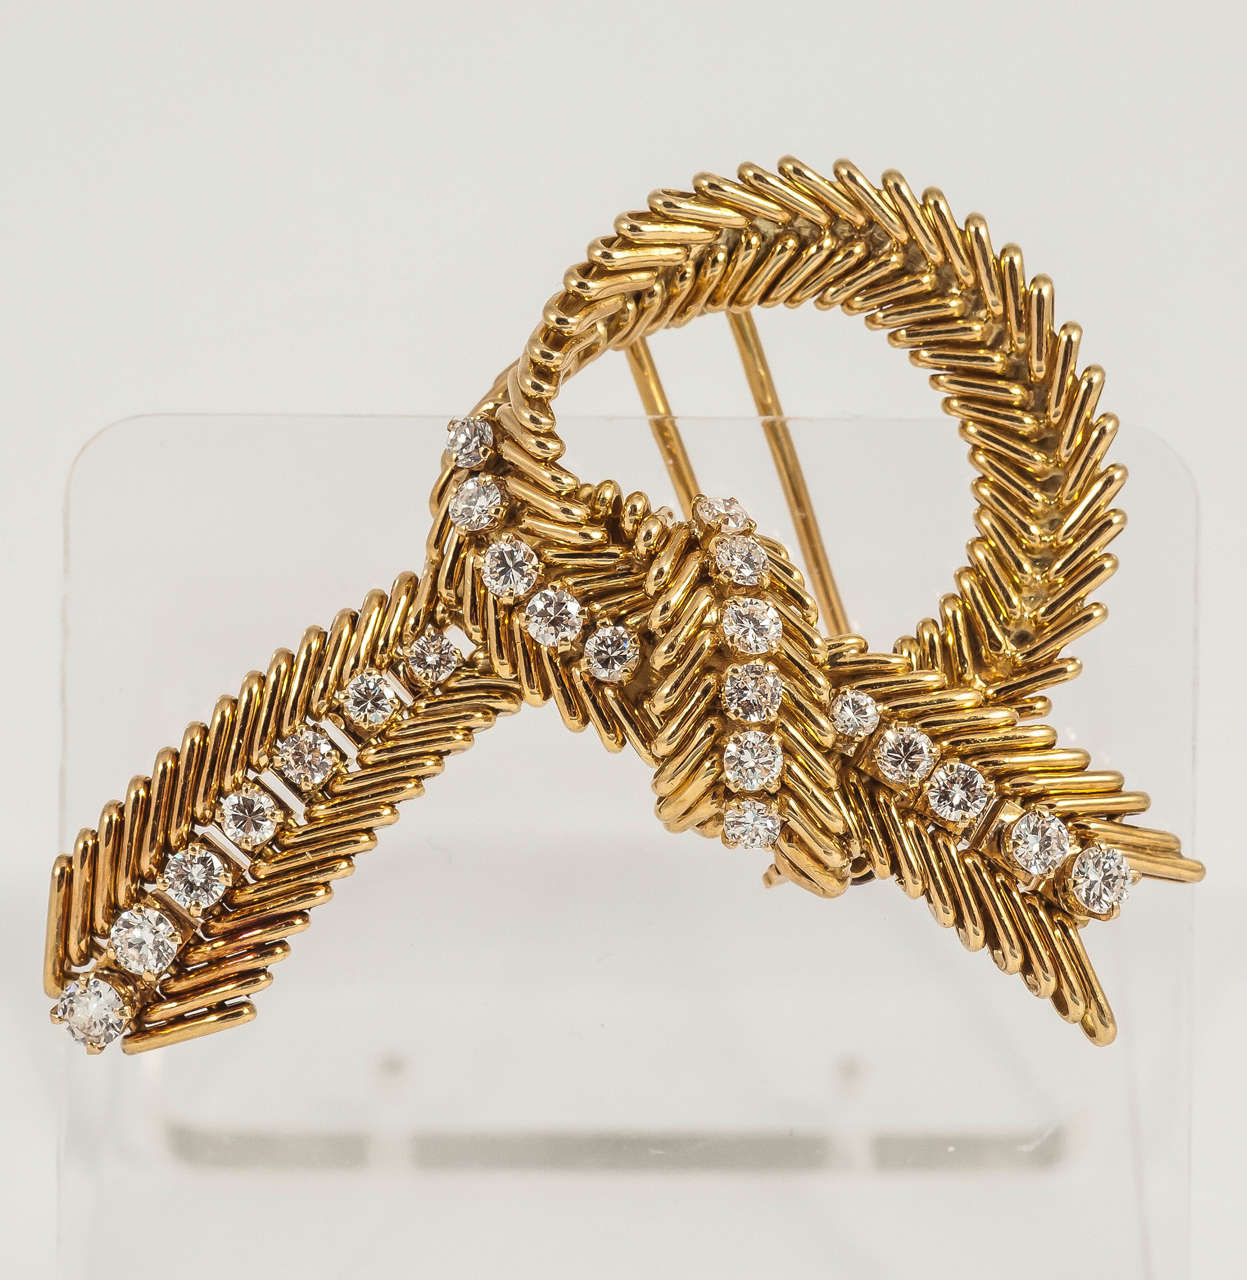 1960s Van Cleef & Arpels Diamond Gold Knot Pin For Sale 1